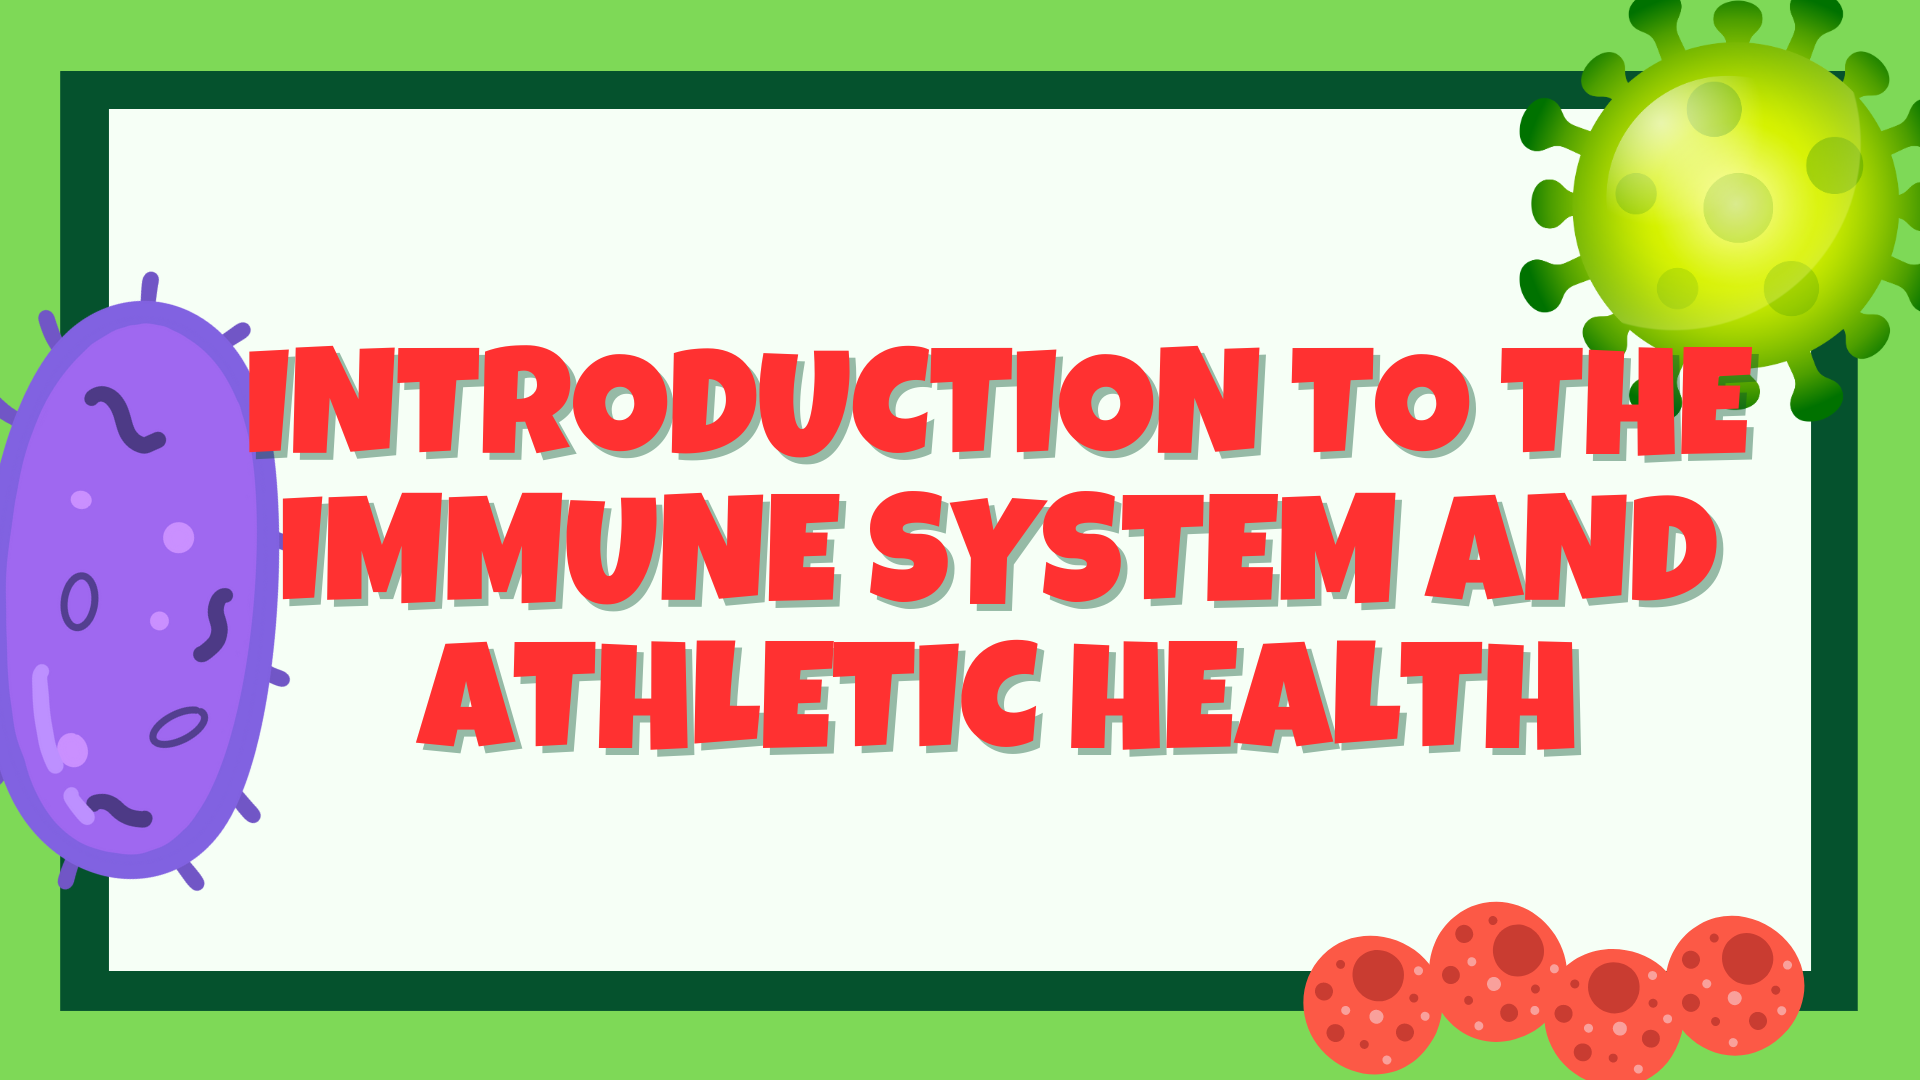 Introduction to the Immune System and Athletic Health